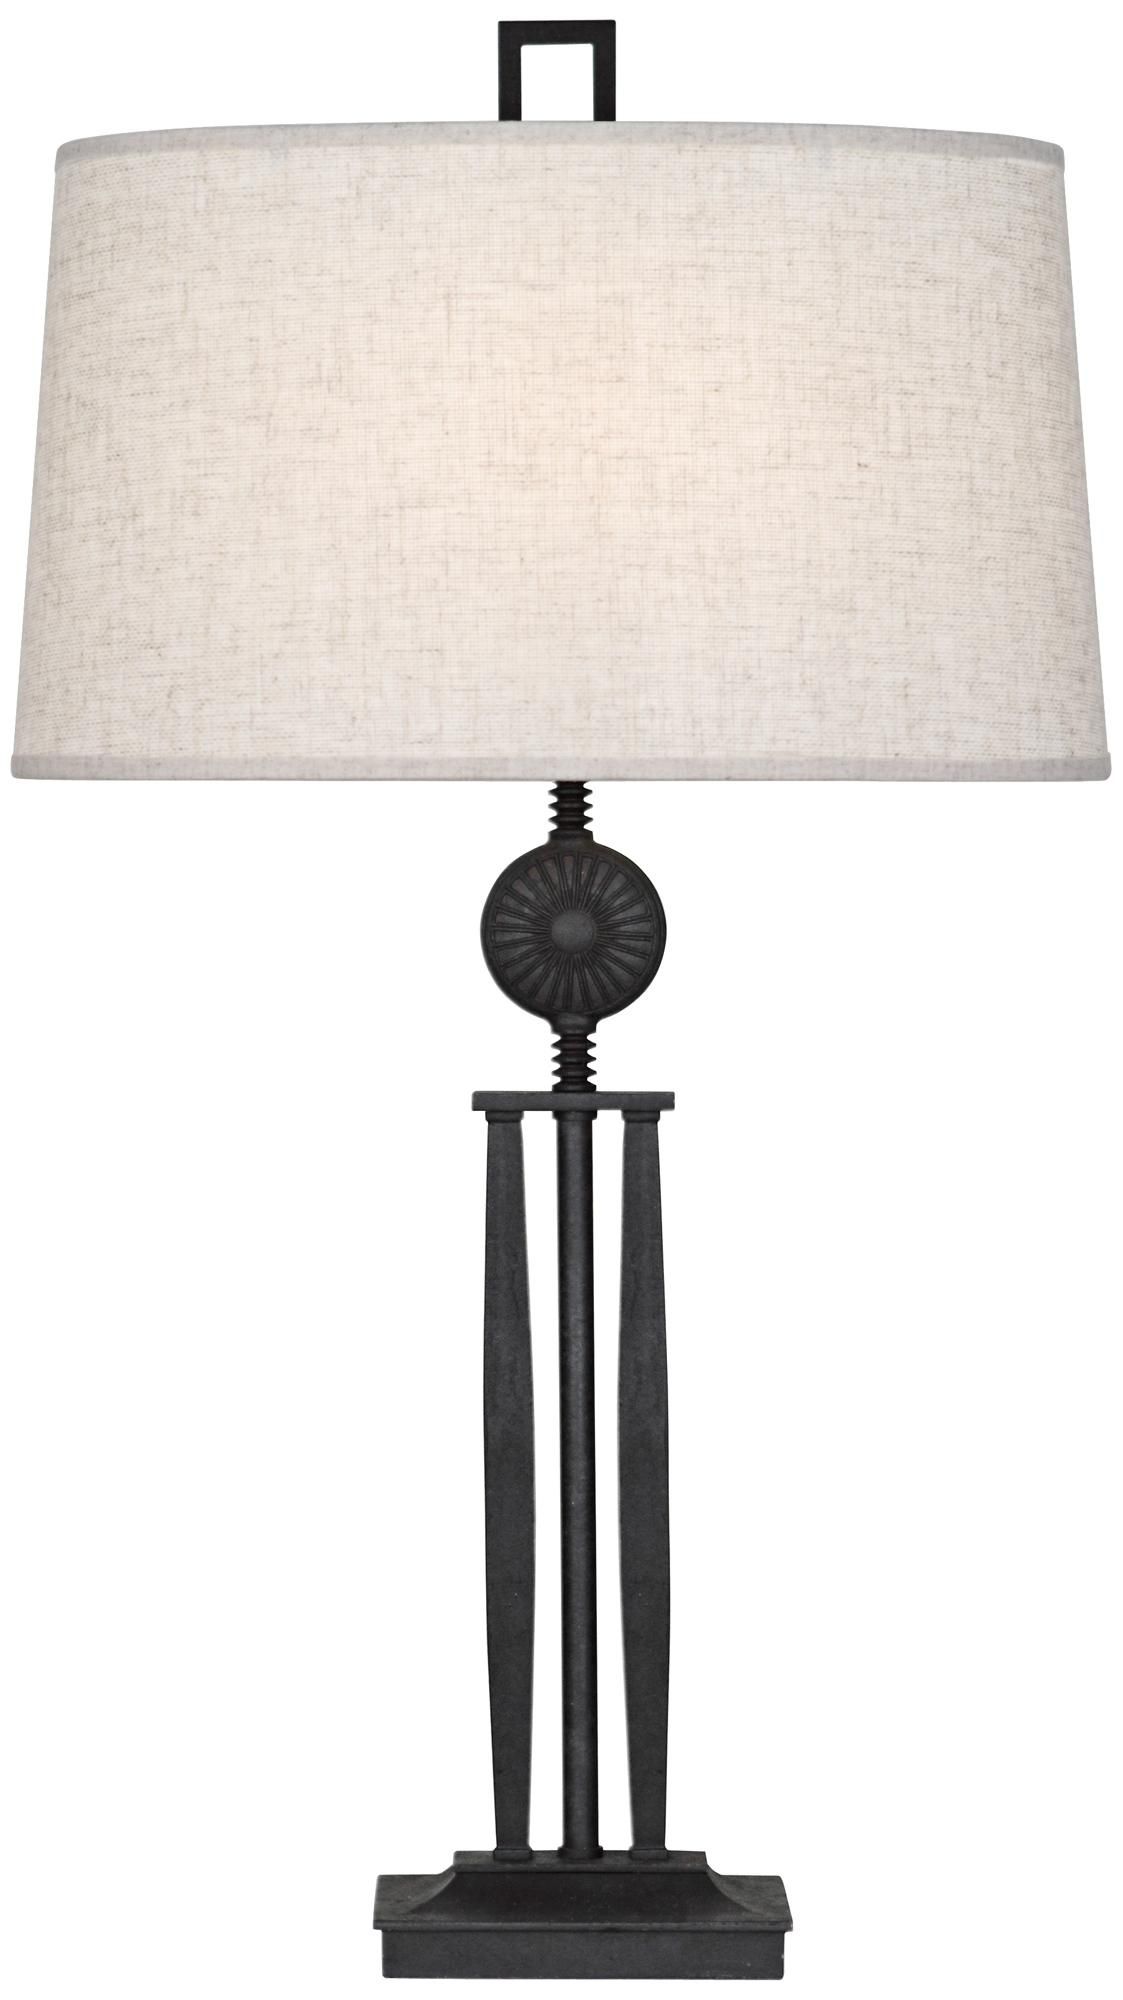 New table lamps in wrought iron